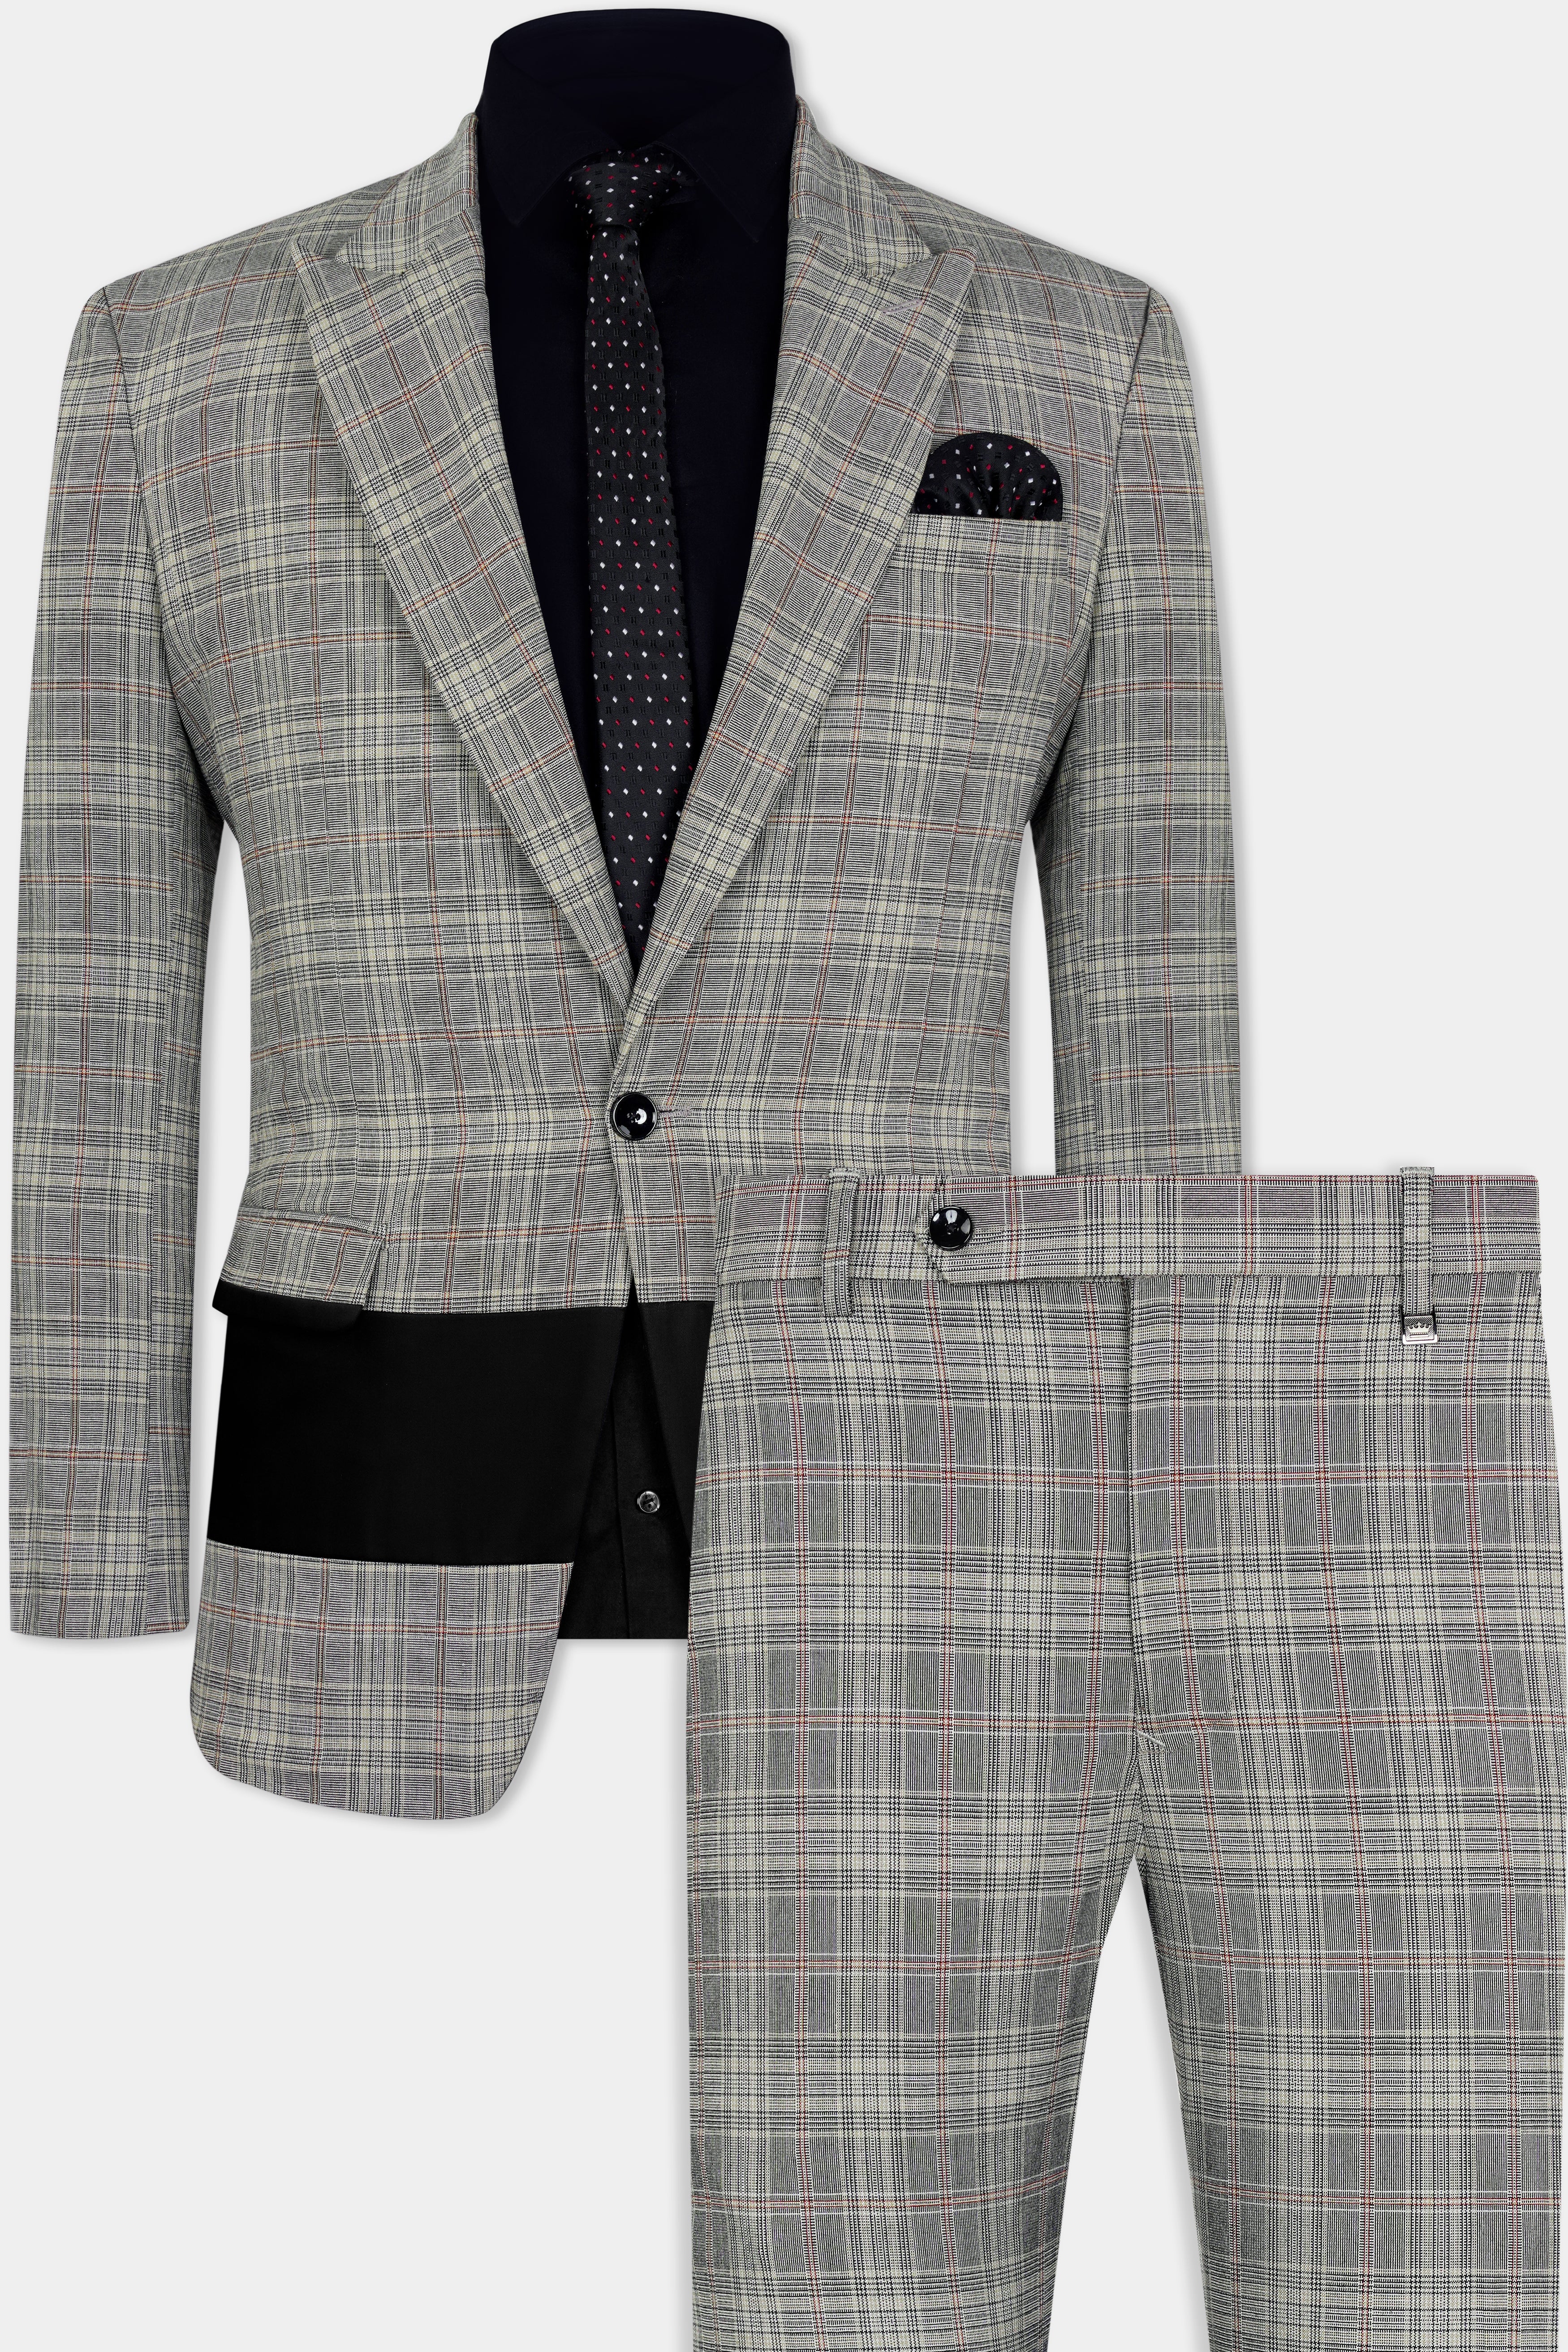 Chalice Gray Plaid and Black Wool Rich Designer Suit ST2928-SBP-D73-36, ST2928-SBP-D73-38, ST2928-SBP-D73-40, ST2928-SBP-D73-42, ST2928-SBP-D73-44, ST2928-SBP-D73-46, ST2928-SBP-D73-48, ST2928-SBP-D73-50, ST2928-SBP-D73-52, ST2928-SBP-D73-54, ST2928-SBP-D73-56, ST2928-SBP-D73-58, ST2928-SBP-D73-60